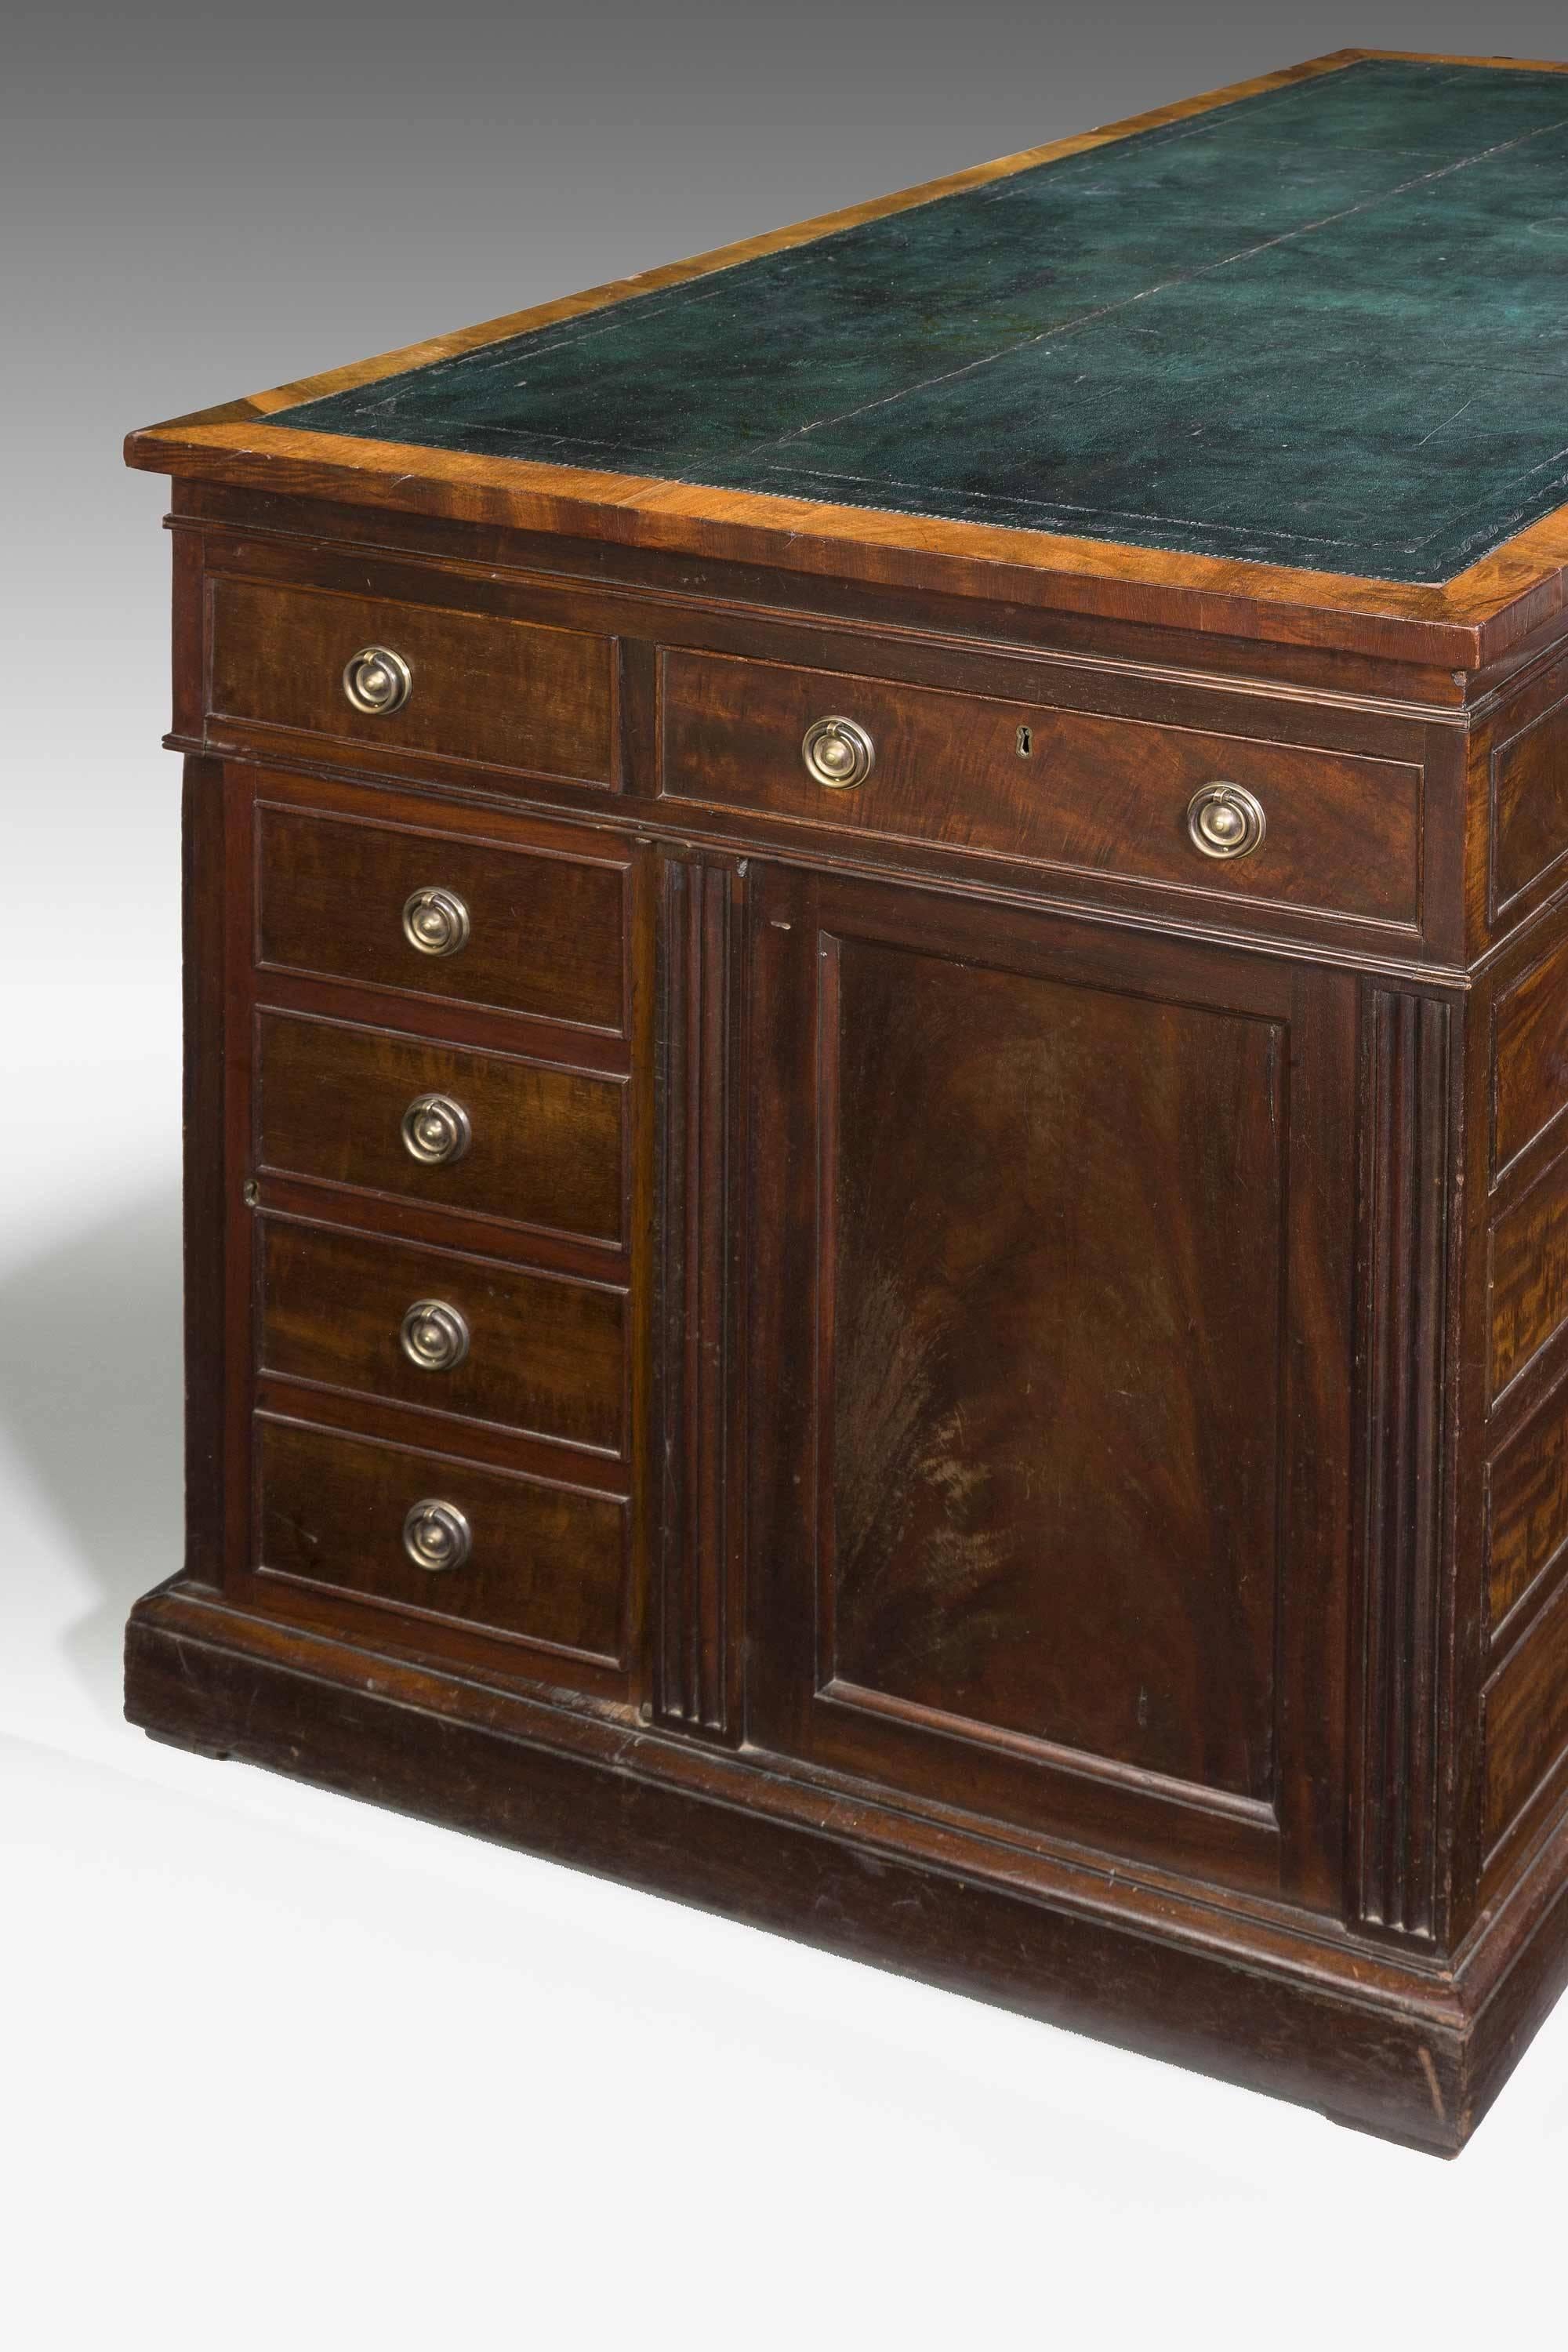 A most unusual 19th century centre-standing mahogany desk, the timbers of exceptional quality, the cupboards and drawers alternatively formed in the upright sections.

RR.